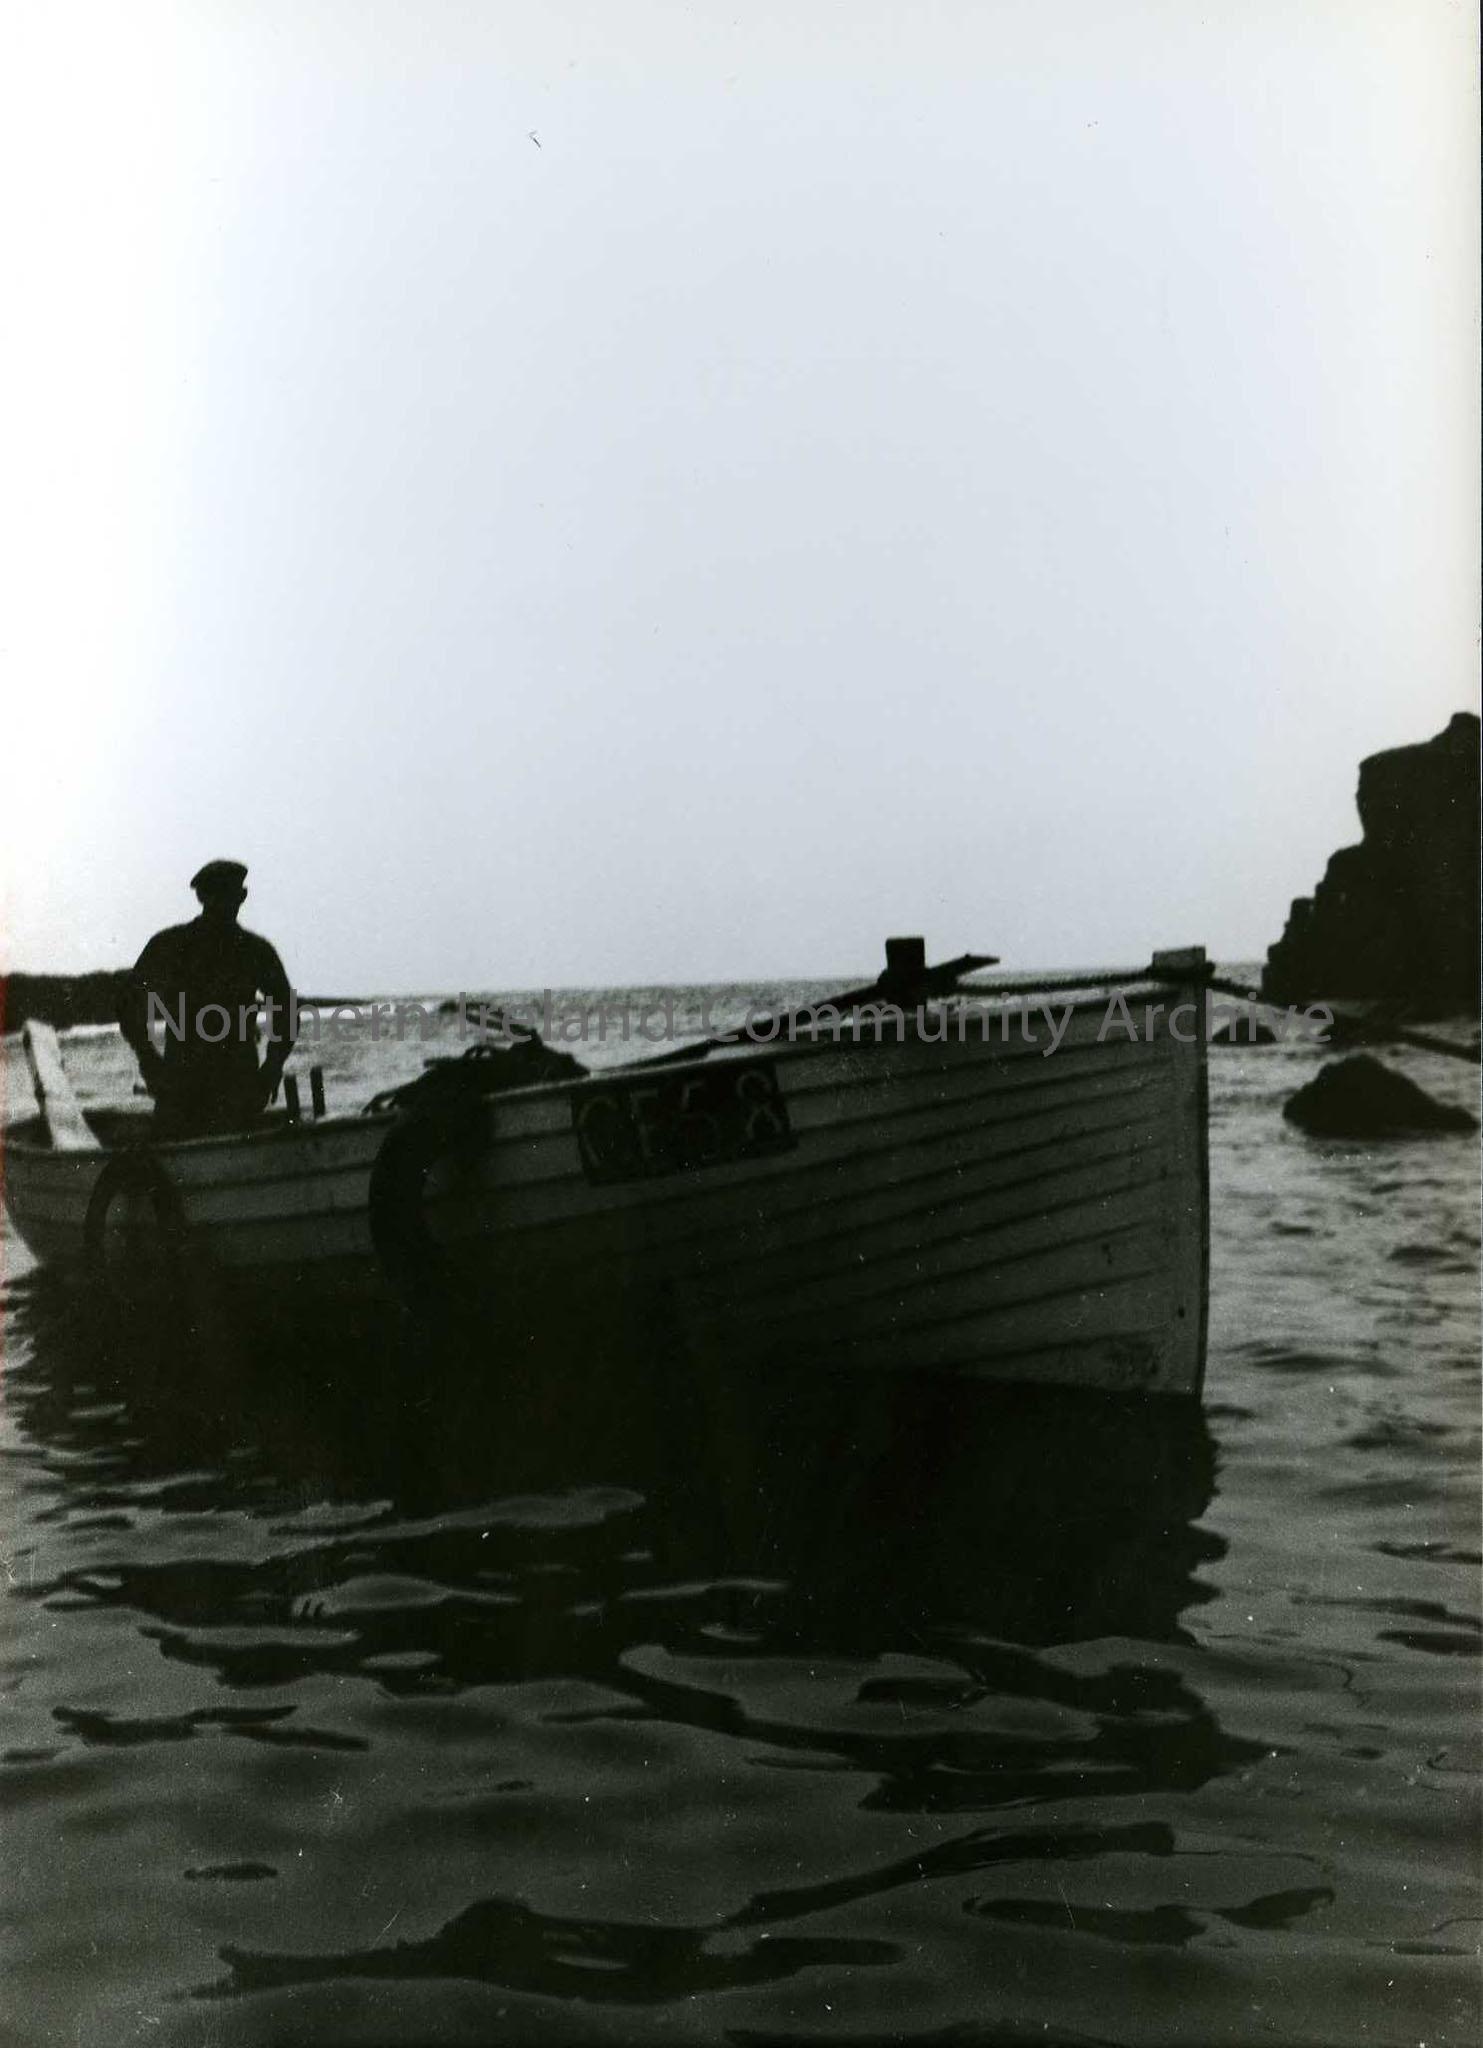 Printed black and white photograph – Man in a boat on water. Painted on the boat is CE58.